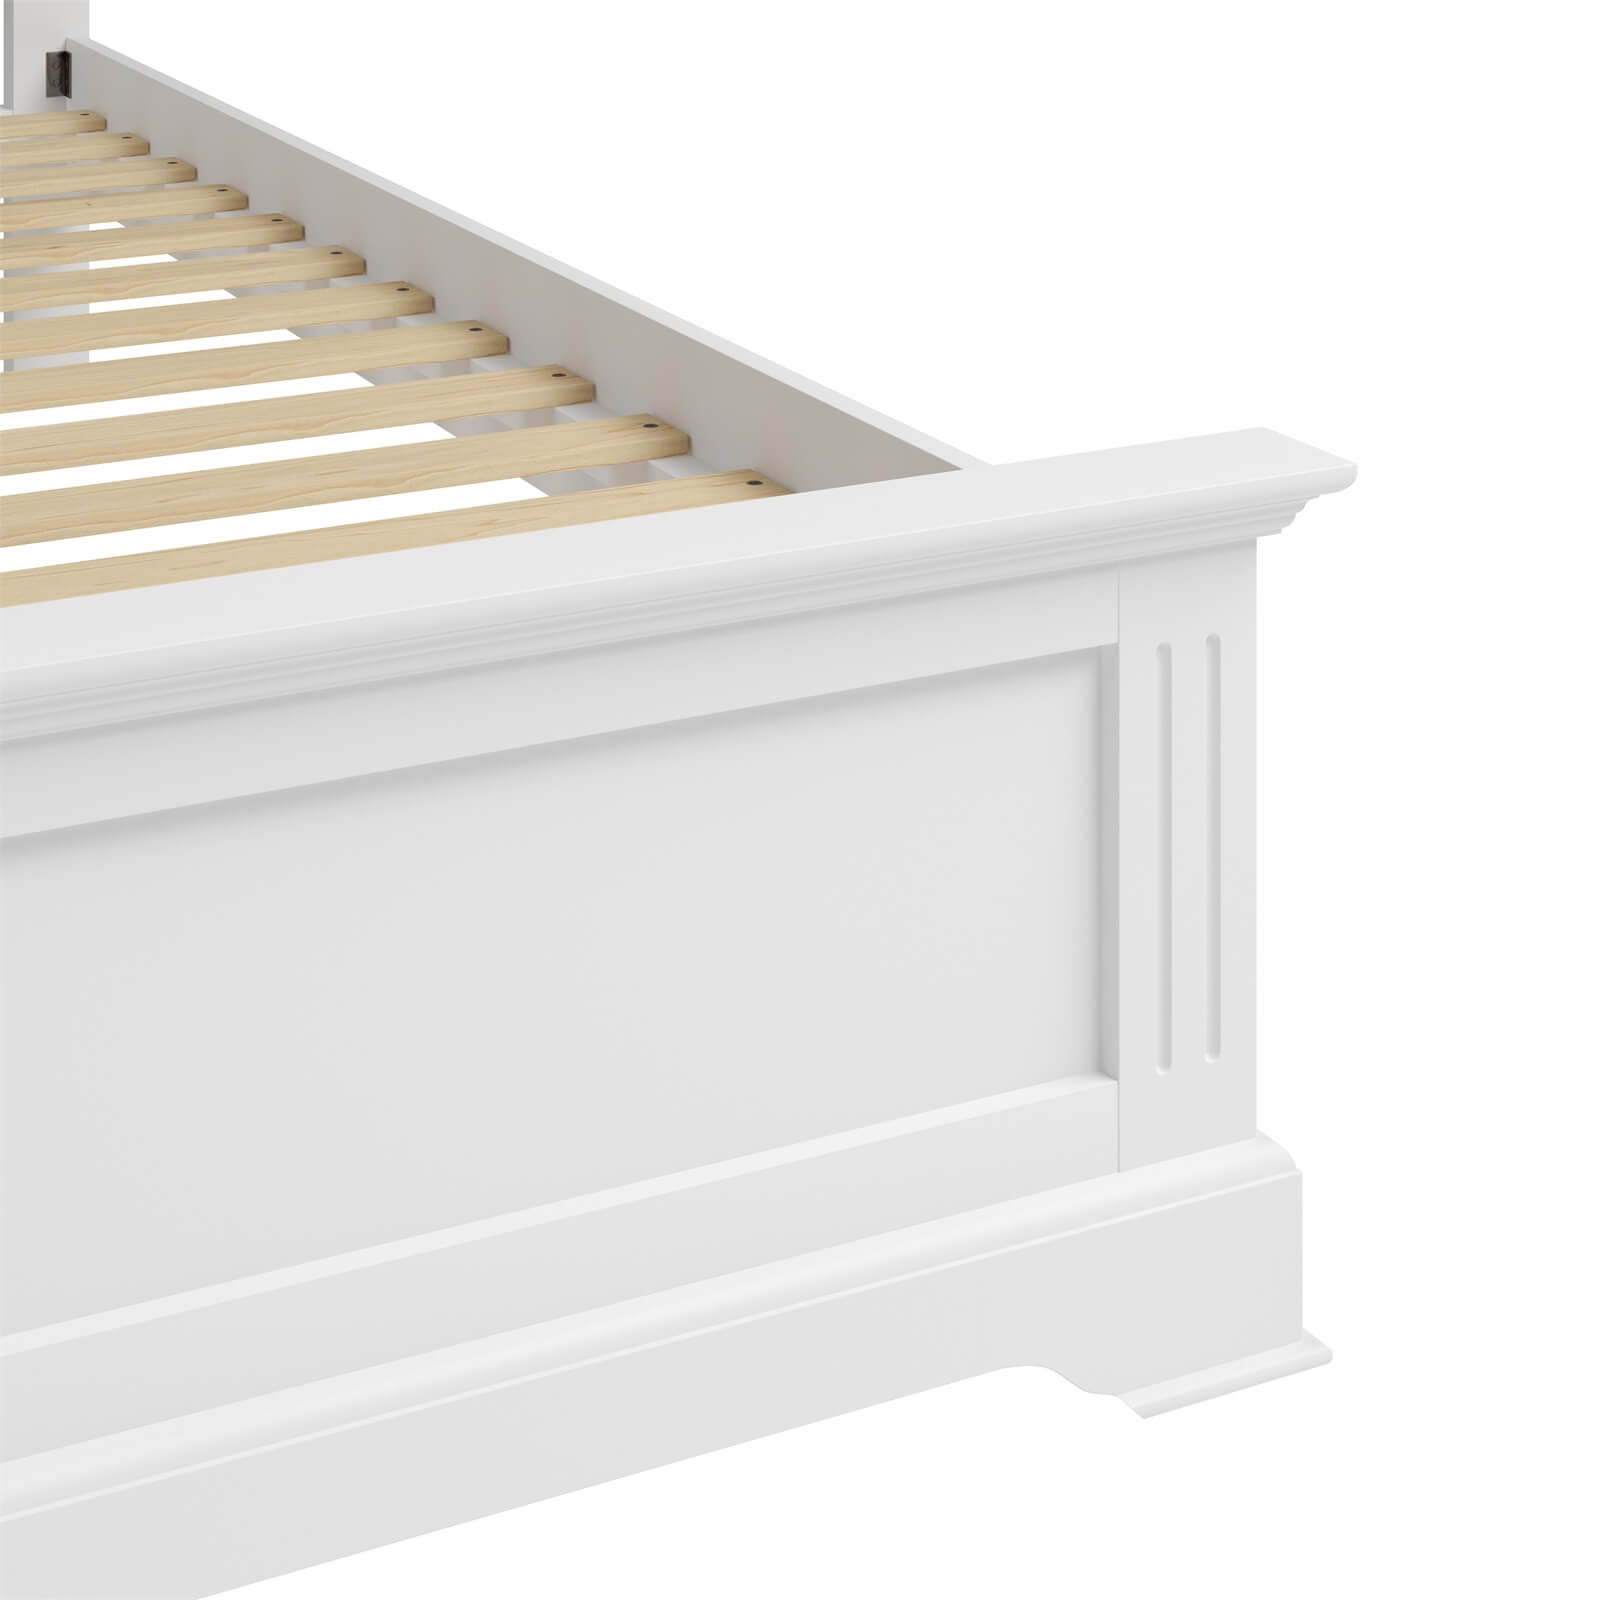 Camborne Double Bed Frame - White